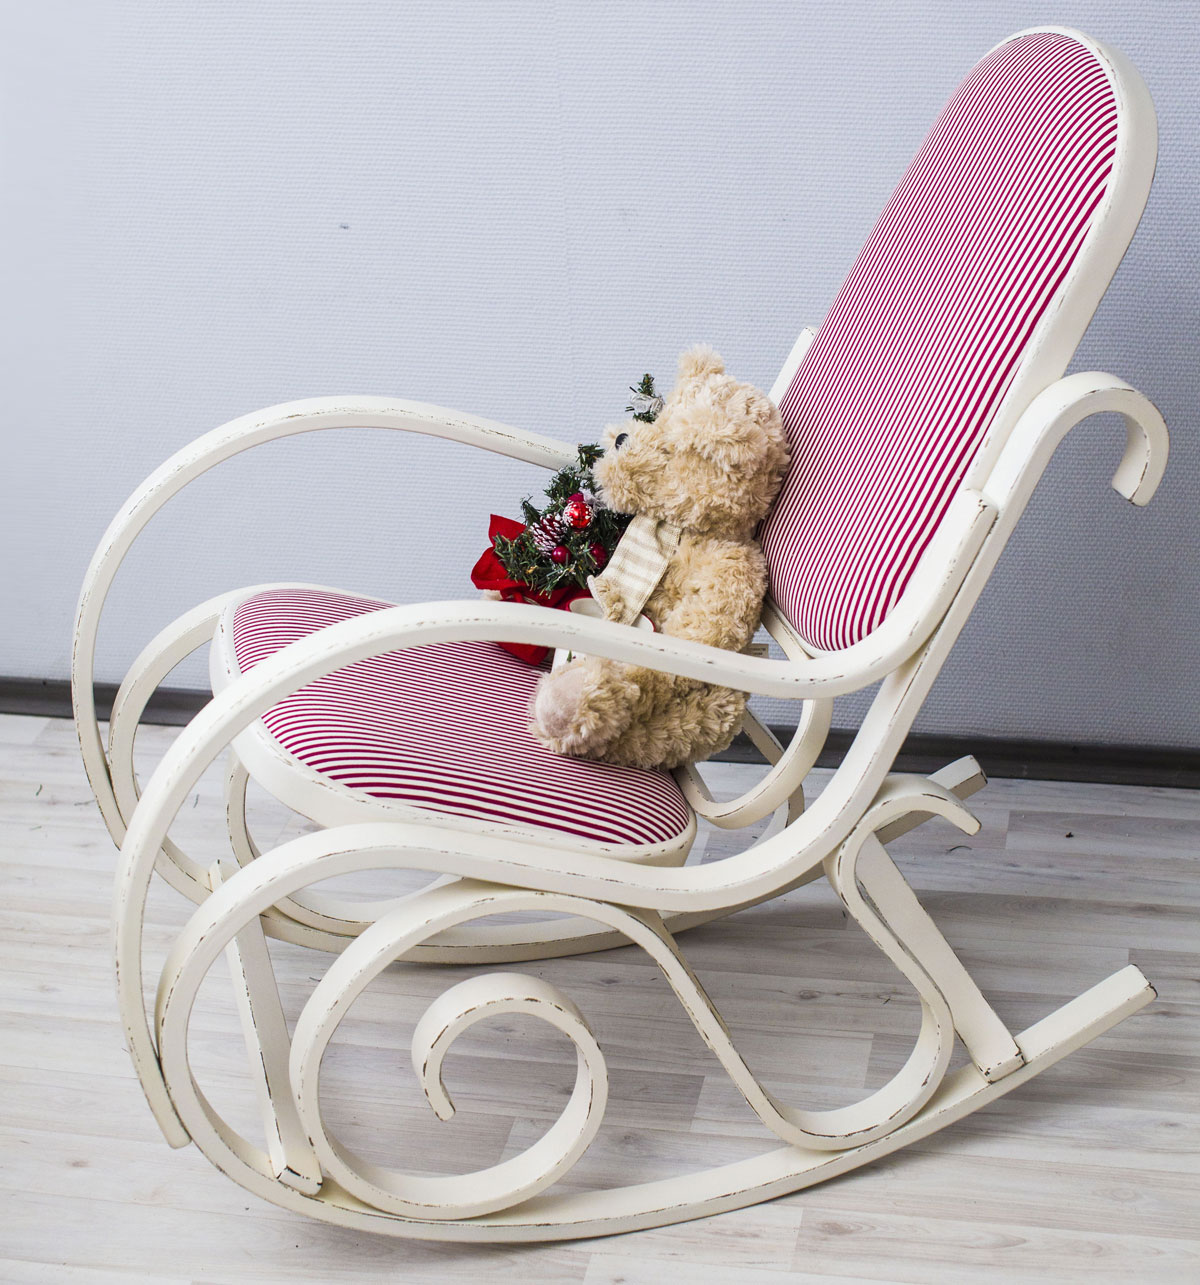 How to choose and buy a rocking chair for children on a bulletin board in Israel